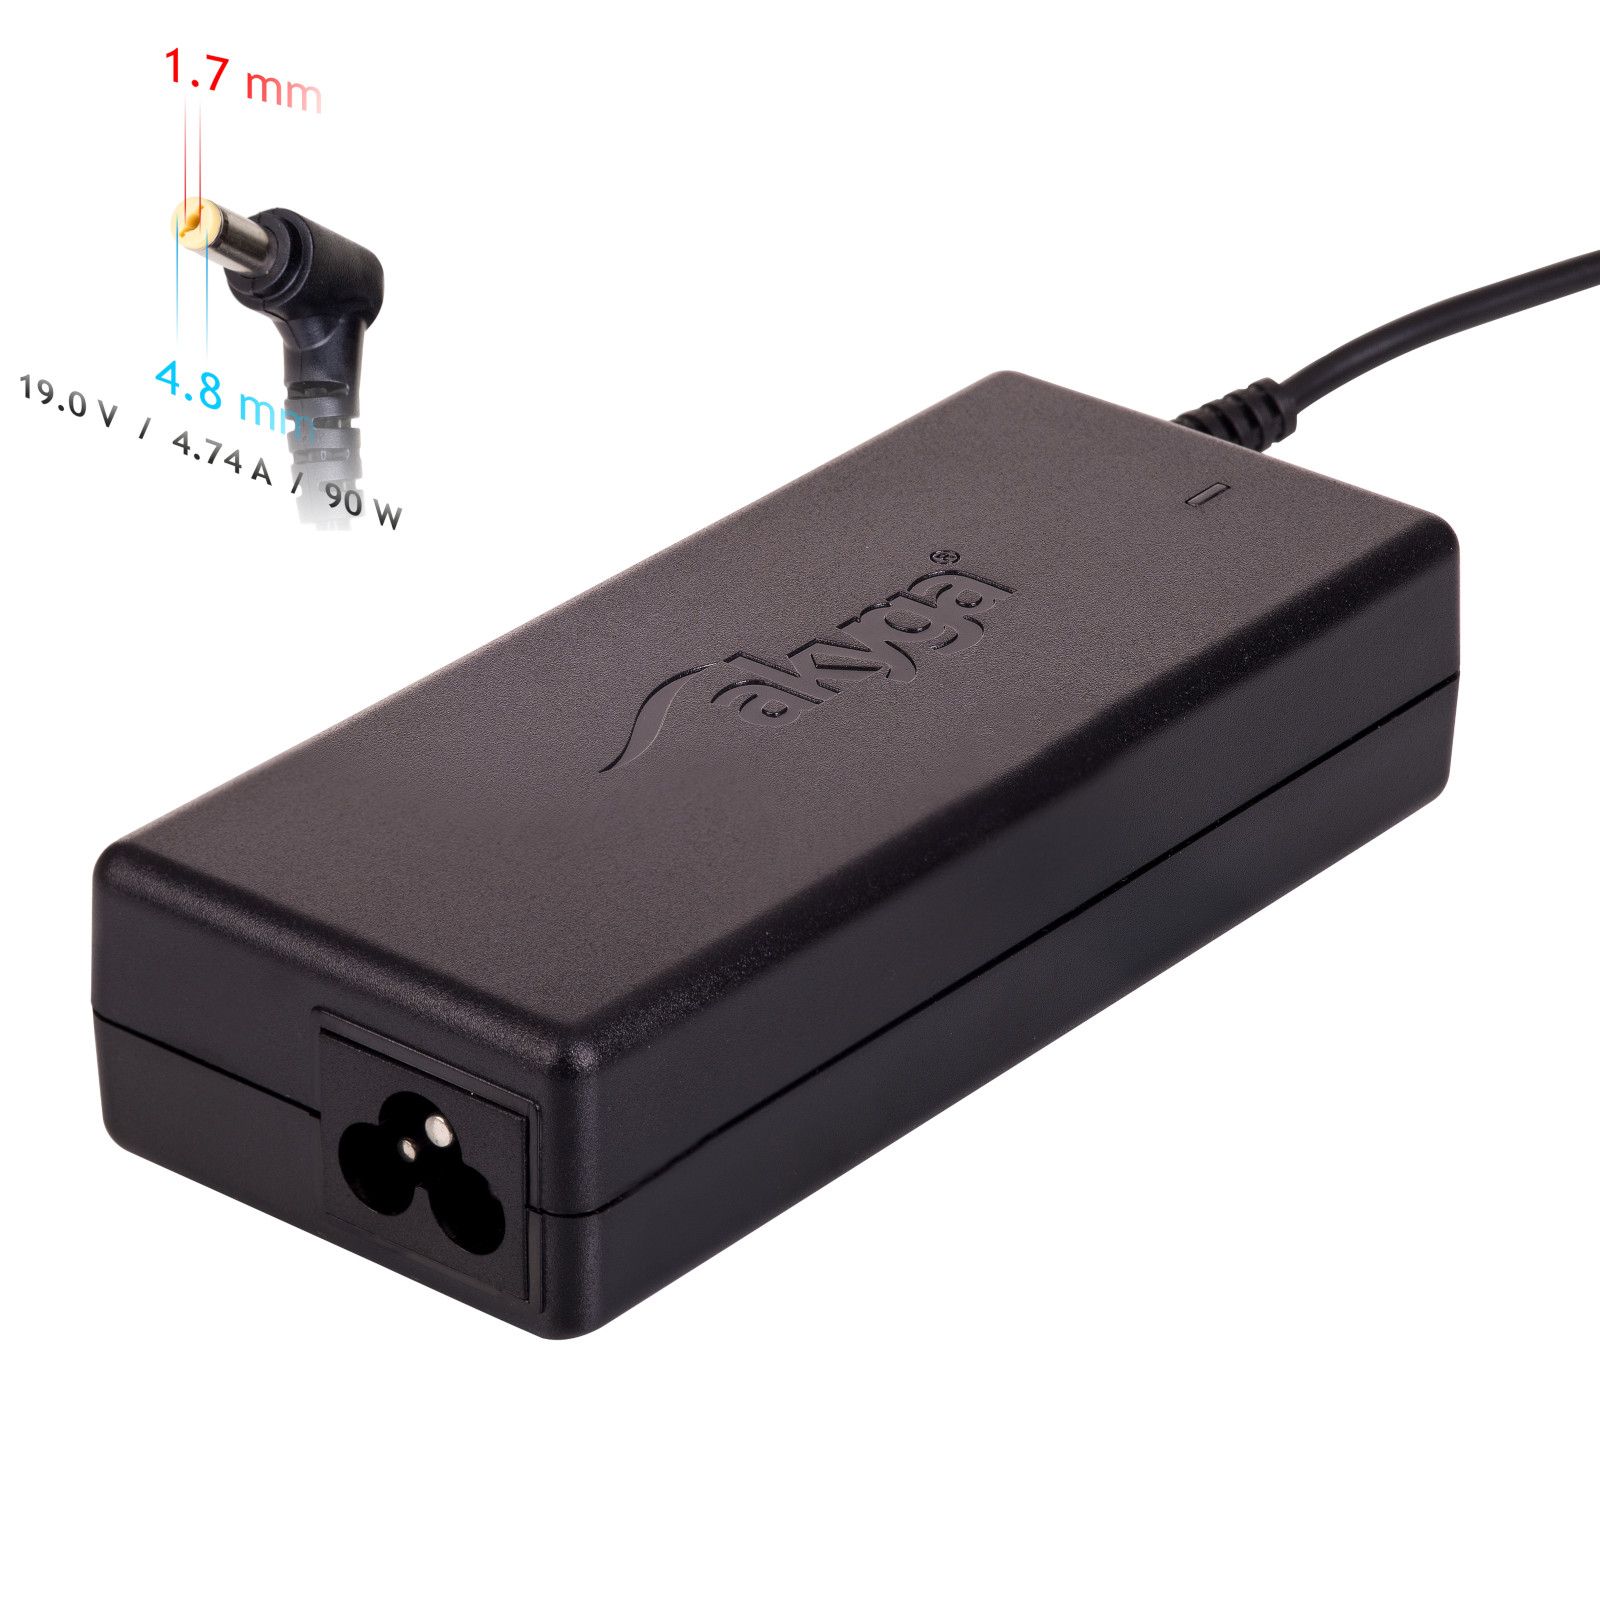 Akyga notebook power adapter AK-ND-08 19V/4.74A 90W 4.8x1.7 mm HP power adapter/inverter Indoor Black_1